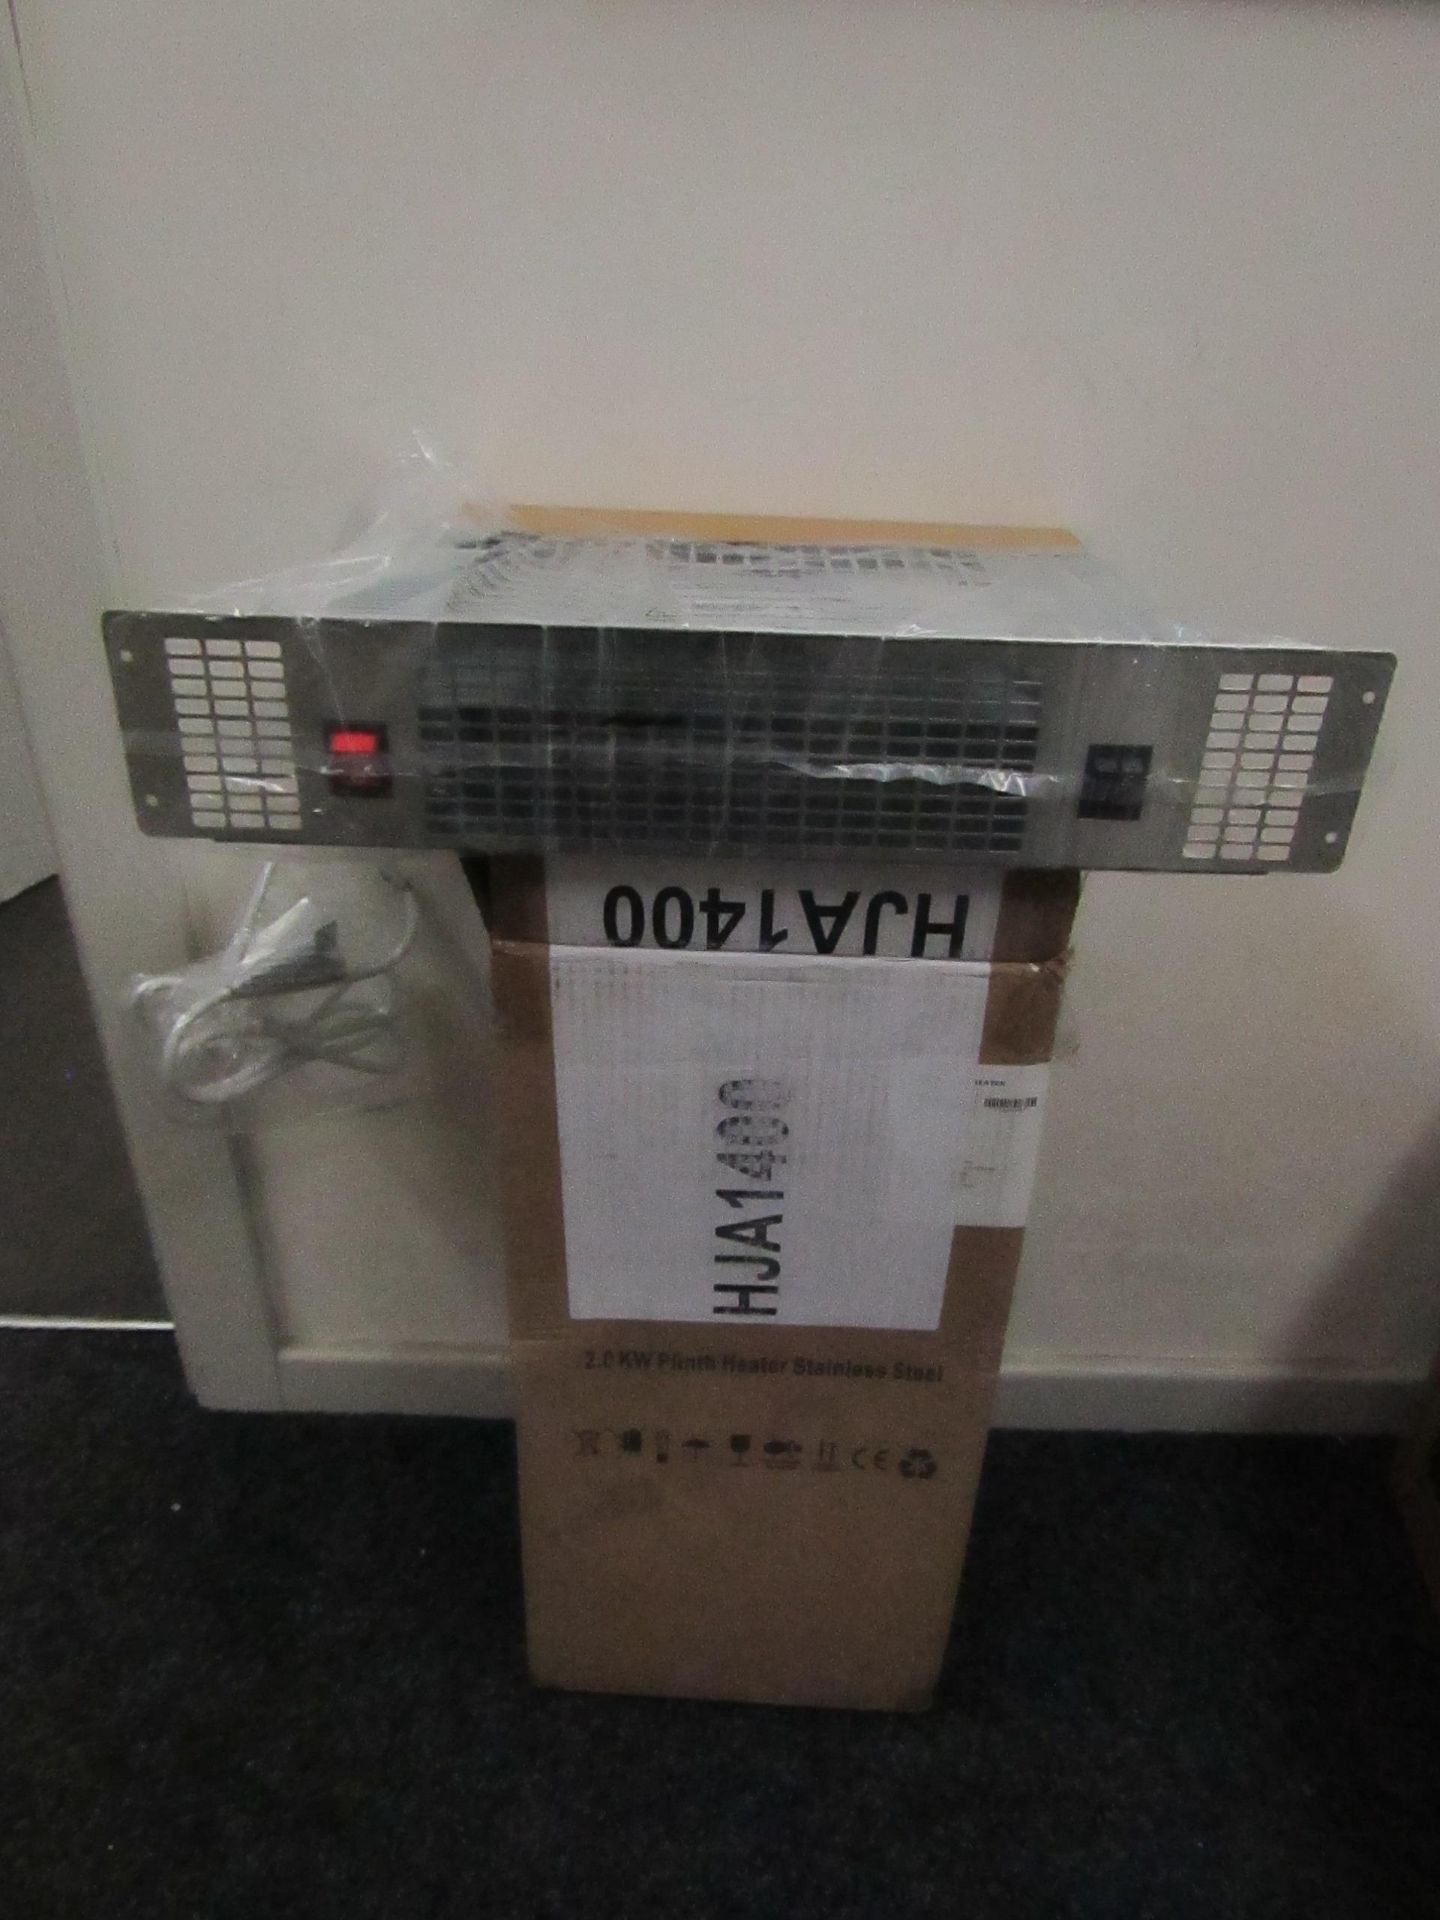 1x TCP UPH201SS PLINTH-MOUNTED FAN HEATER SILVER 2000W 500 X 100MM, new and boxed, Economic, - Image 3 of 3